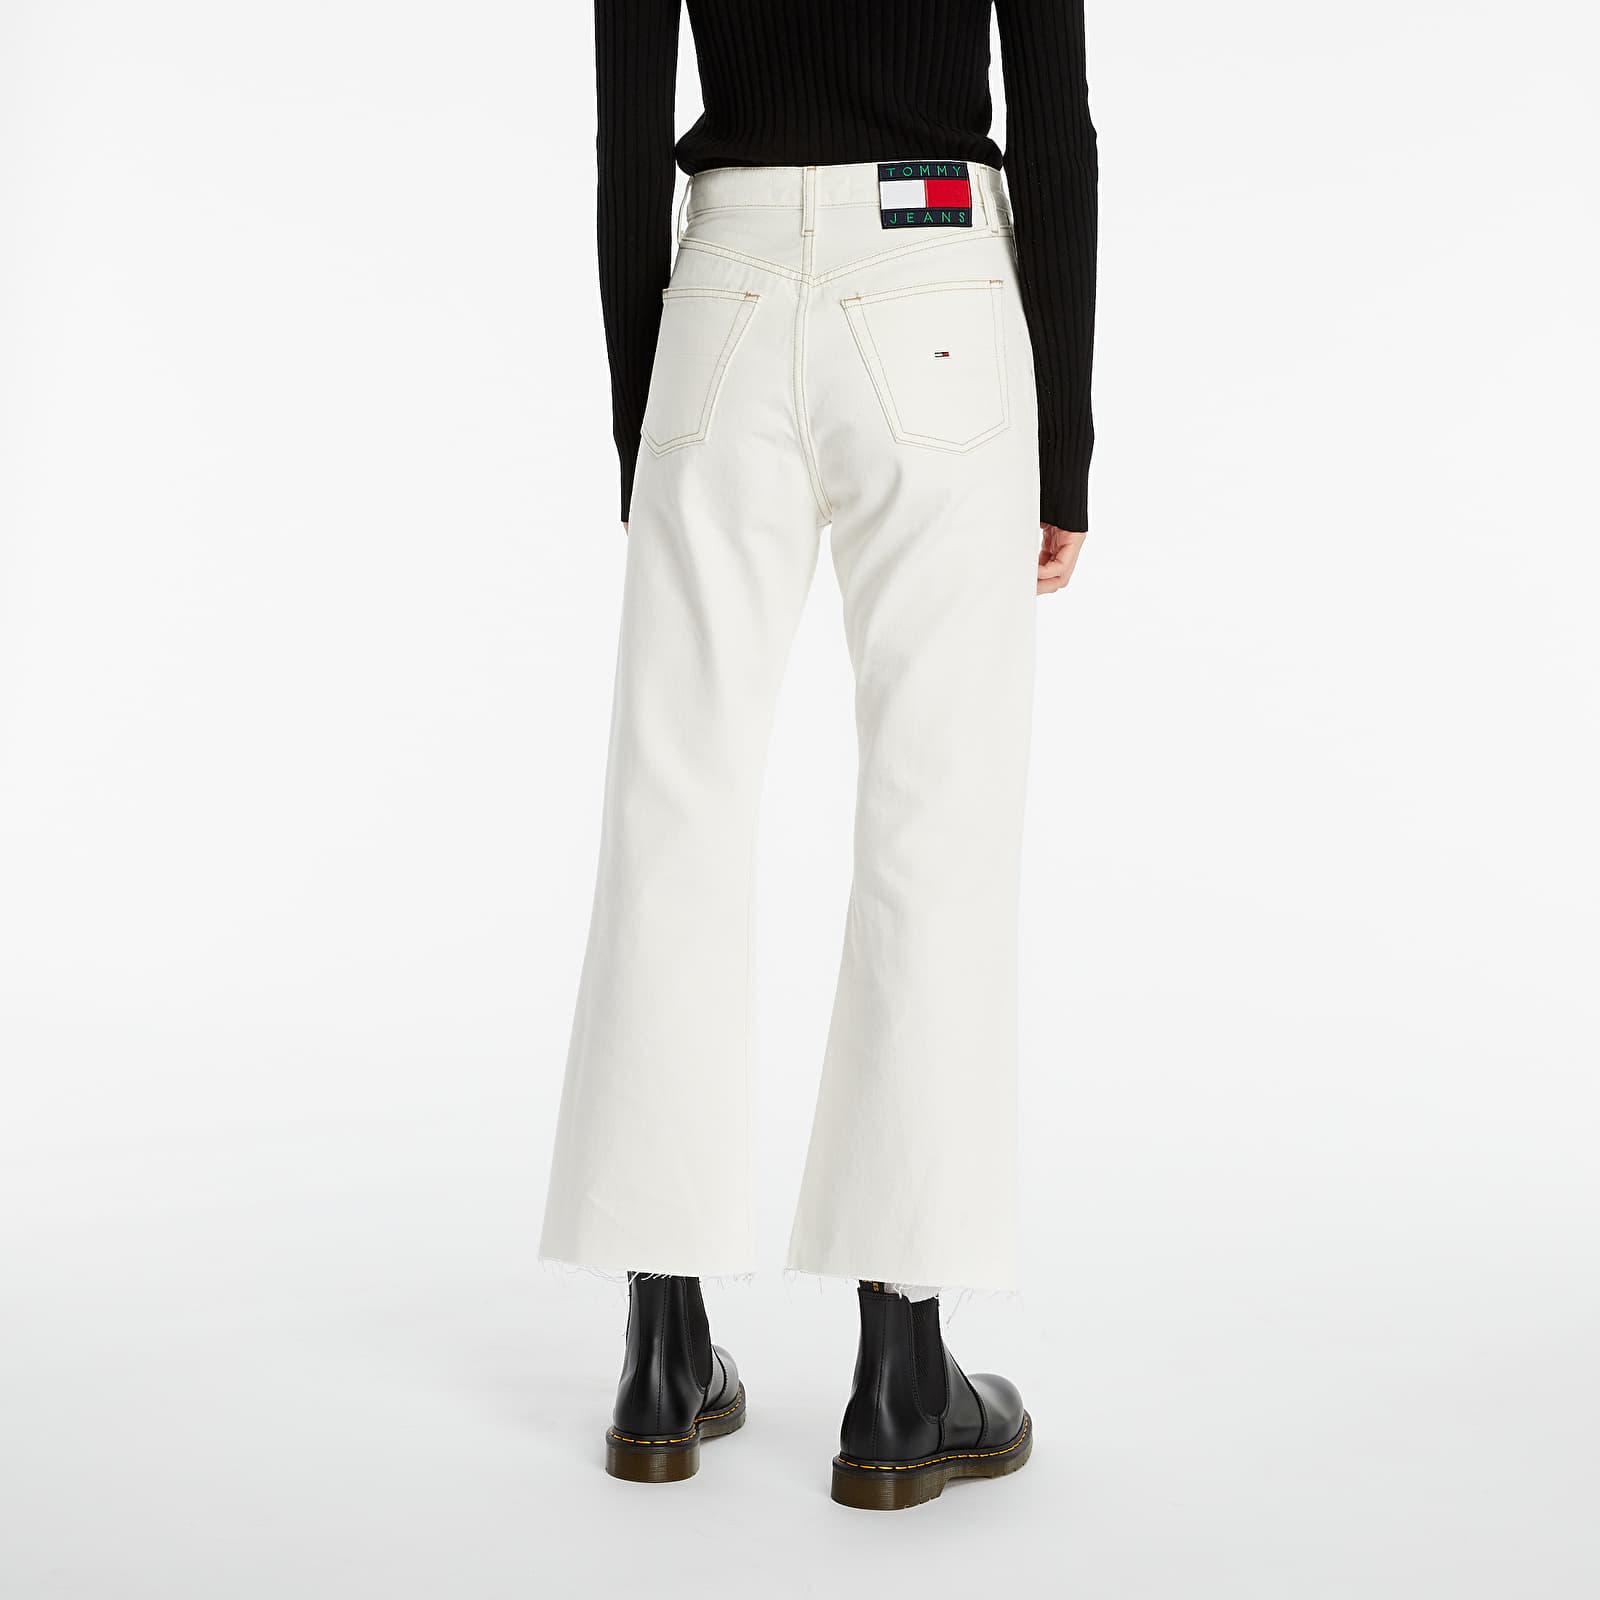 Tommy Hilfiger Jeans Harper High Rise Flare Ankle Jeans White